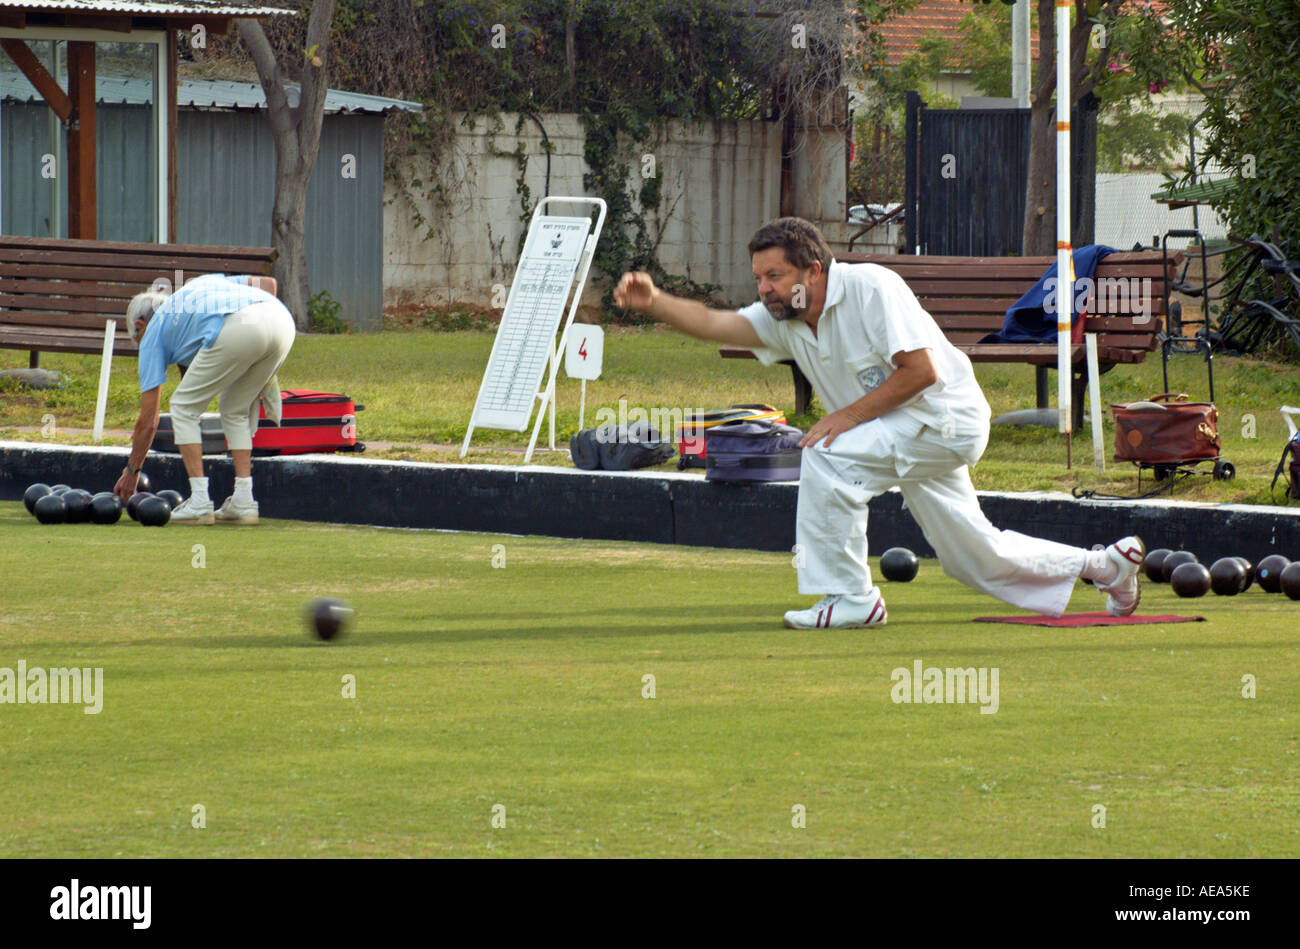 Man delivering wood on a Lawn bowling green Stock Photo